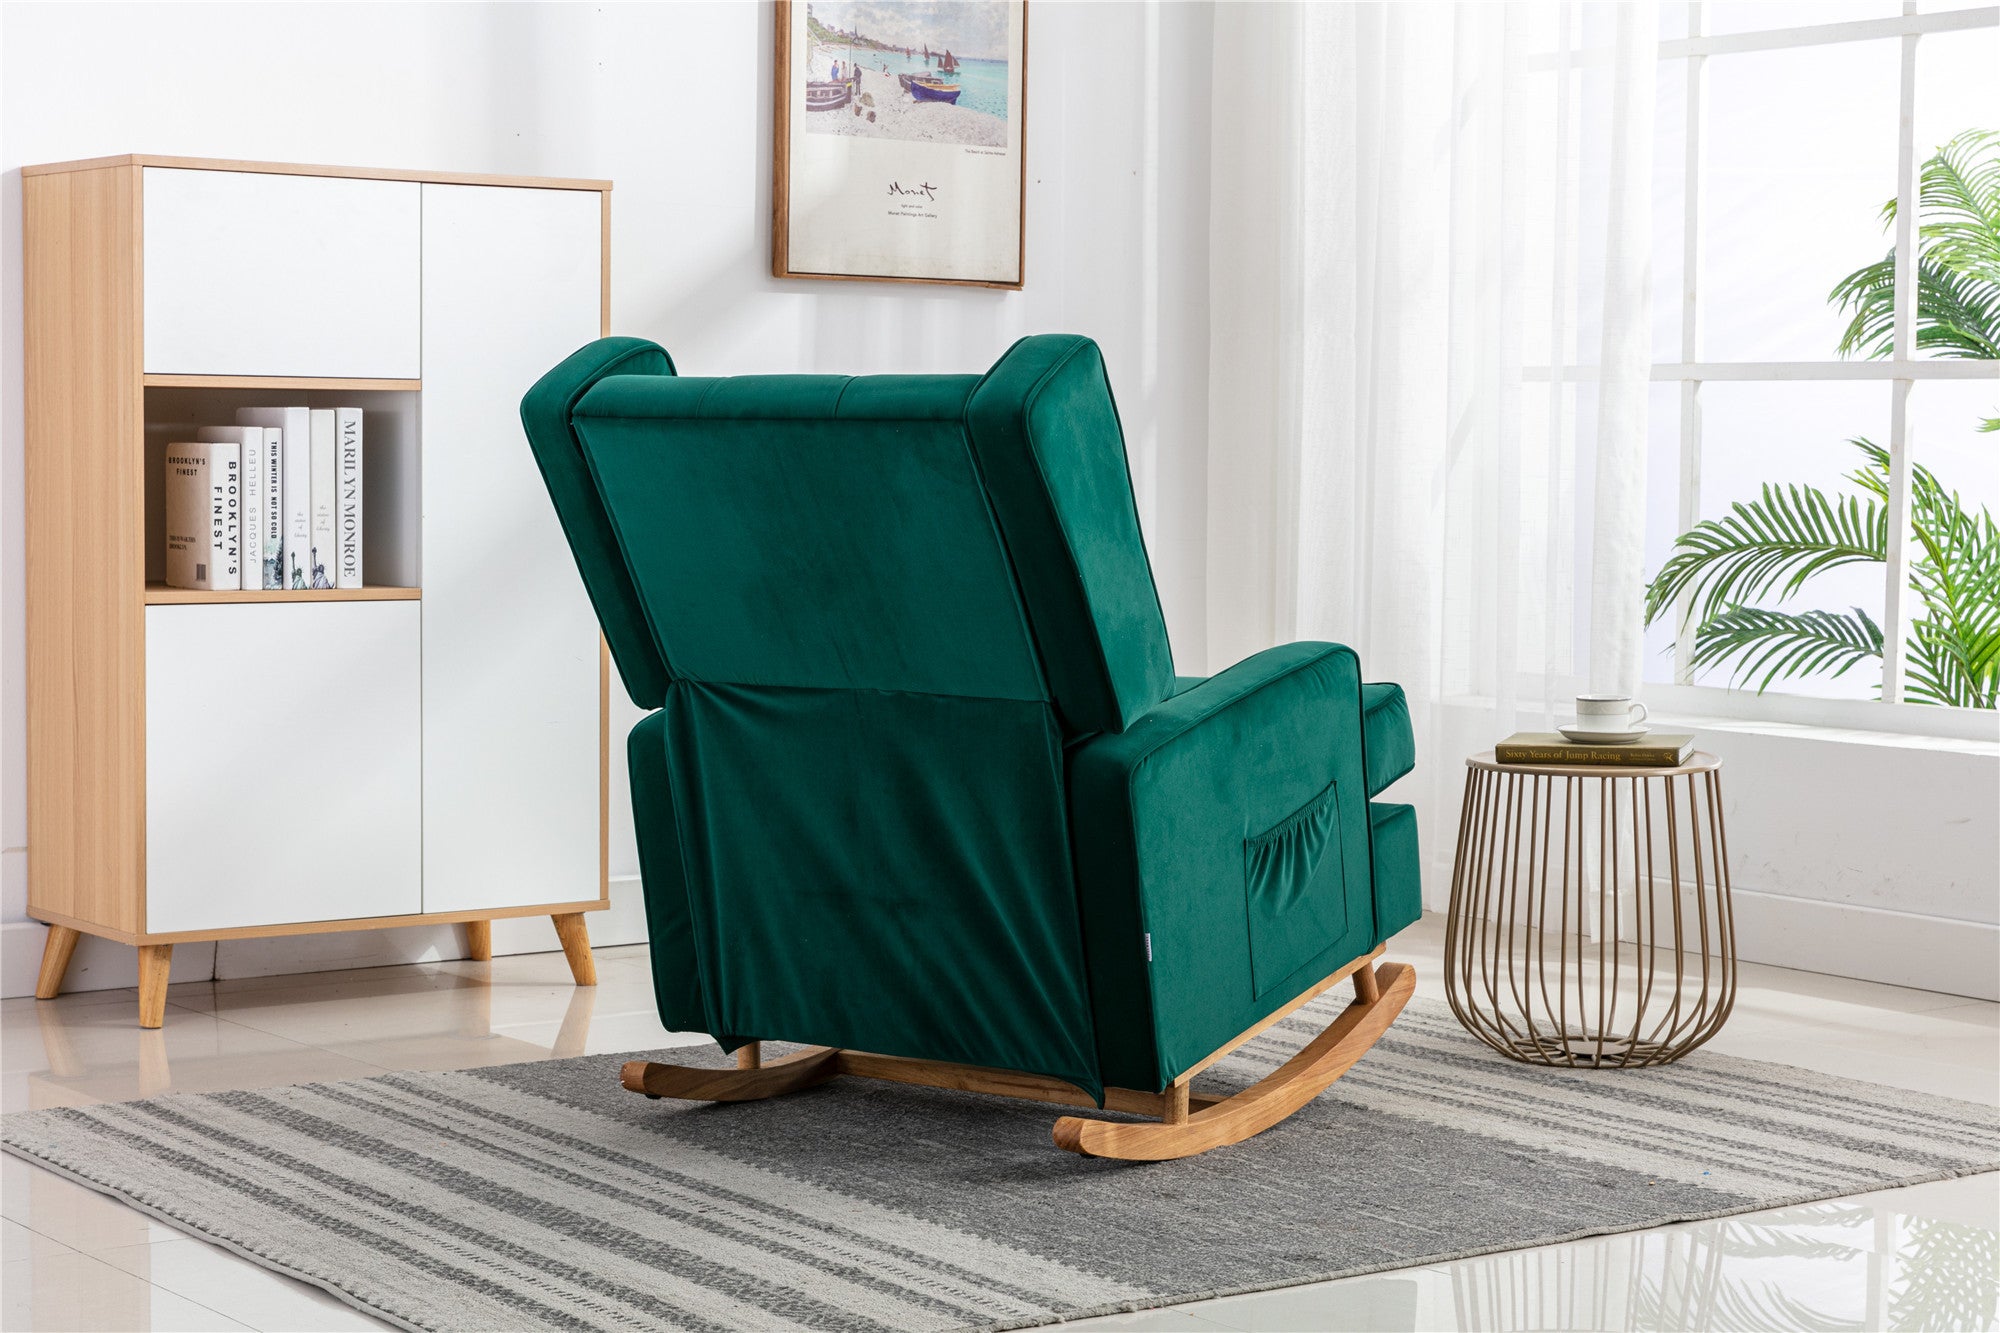 30.7"W Comfortable Rocking Chair with Natural Solid Rubber Wood Legs, Emerald